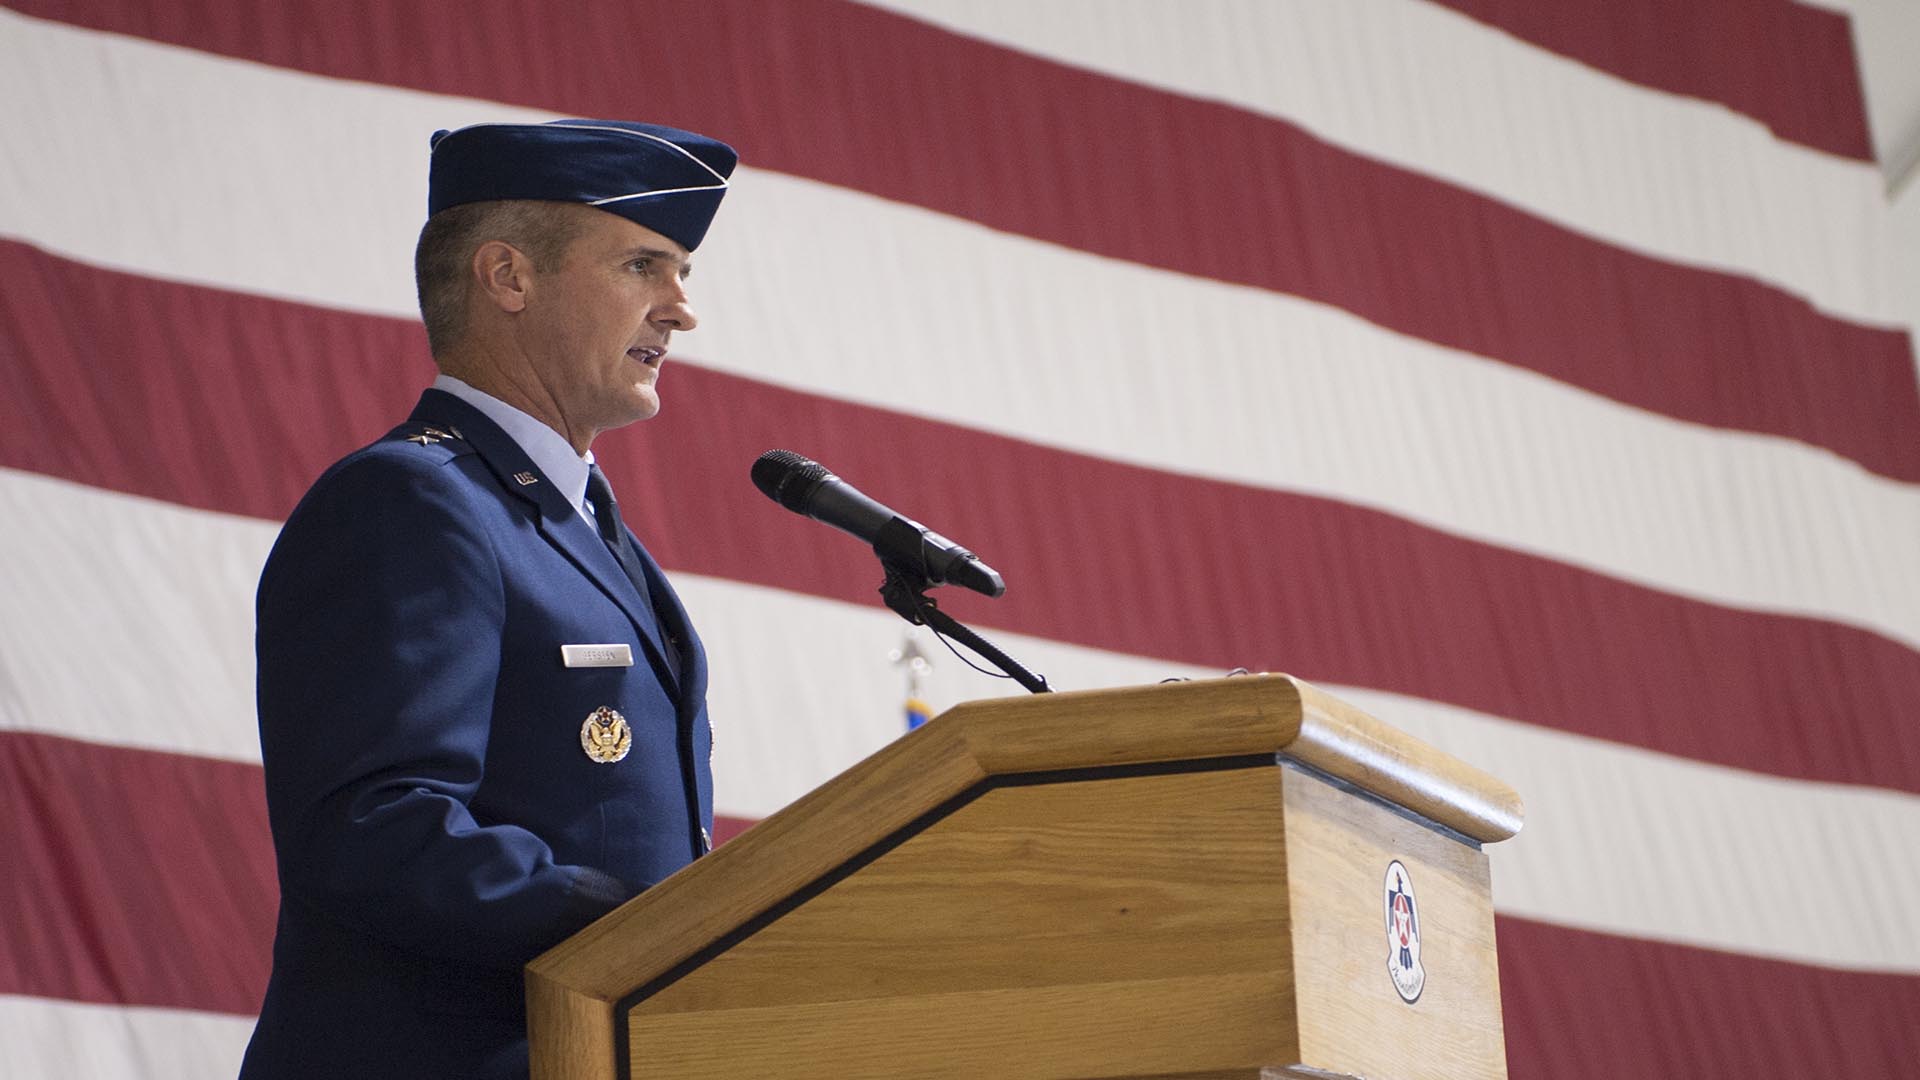 Maj. Gen. Peter Gersten addresses ceremony attendees shortly after taking command of the U.S. Air Force Warfare Center July 13, 2017 at Nellis Air Force Base, Nev. Gersten is a command pilot with more than 2,800 total flying hours in a variety of air frames; 400 of which were flown in combat over Iraq, Syria, Afghanistan and Bosnia. (U.S. Air Force photo by Senior Airman Joshua Kleinholz)